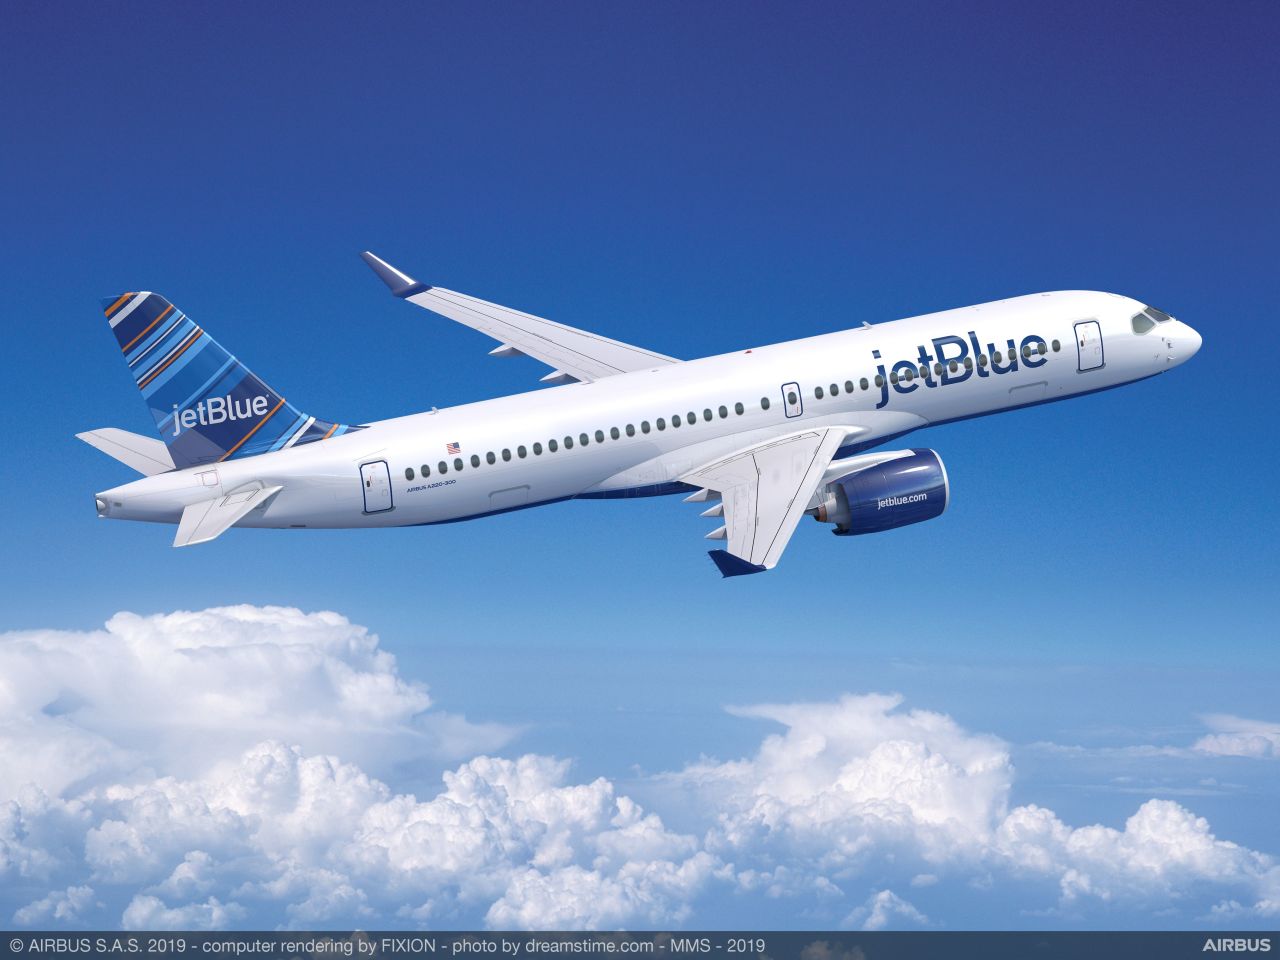 JetBlue is waiting on 60 Airbus A220-300 jetliners -- seen here in a rendering.